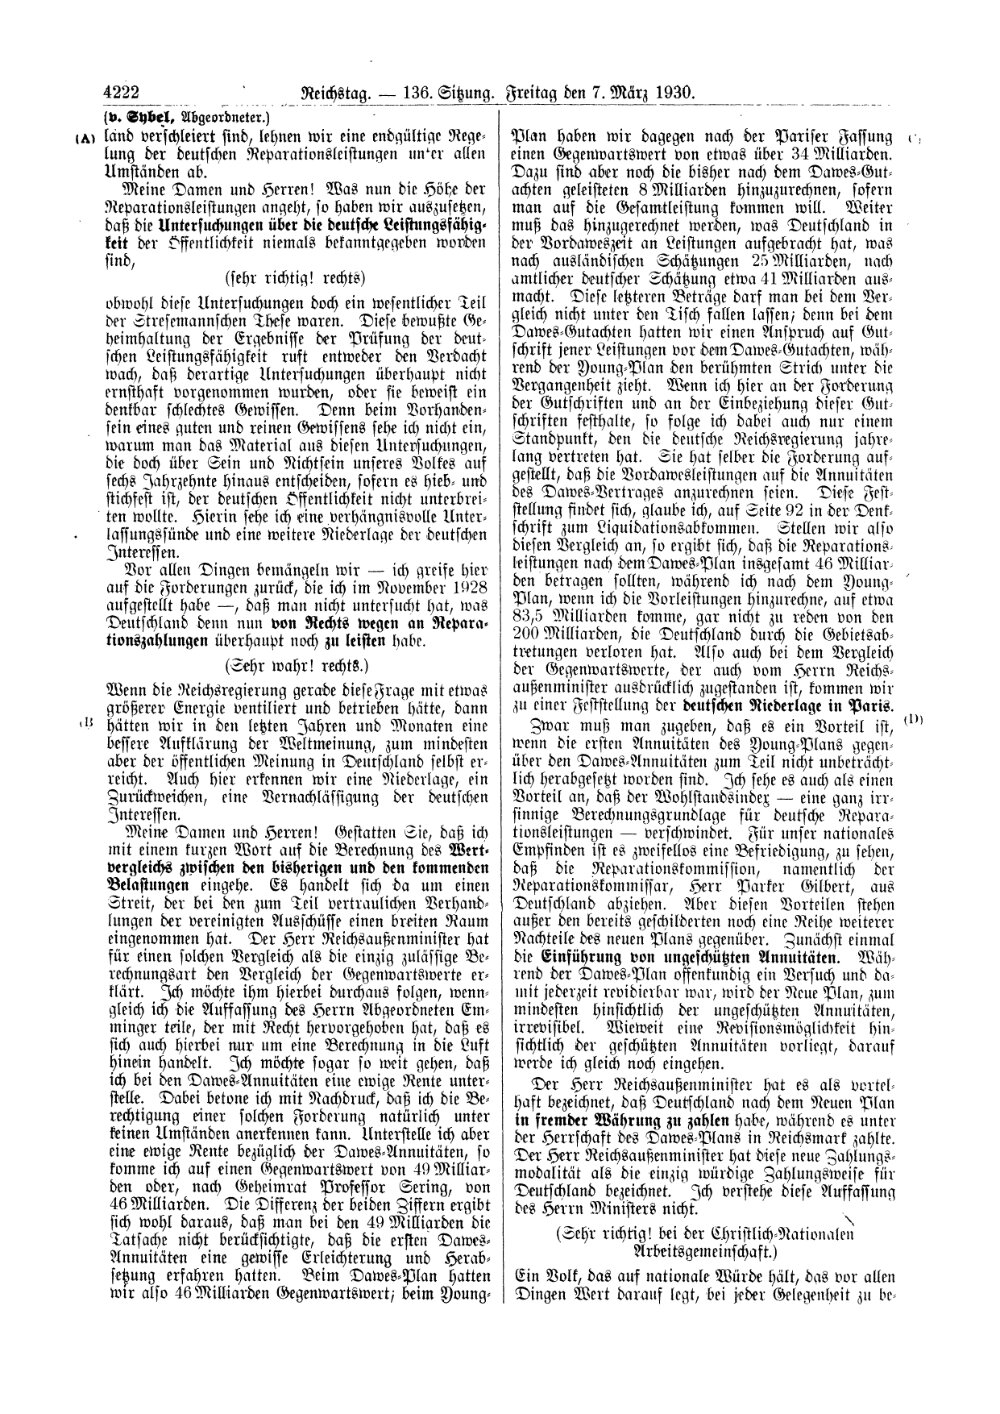 Scan of page 4222